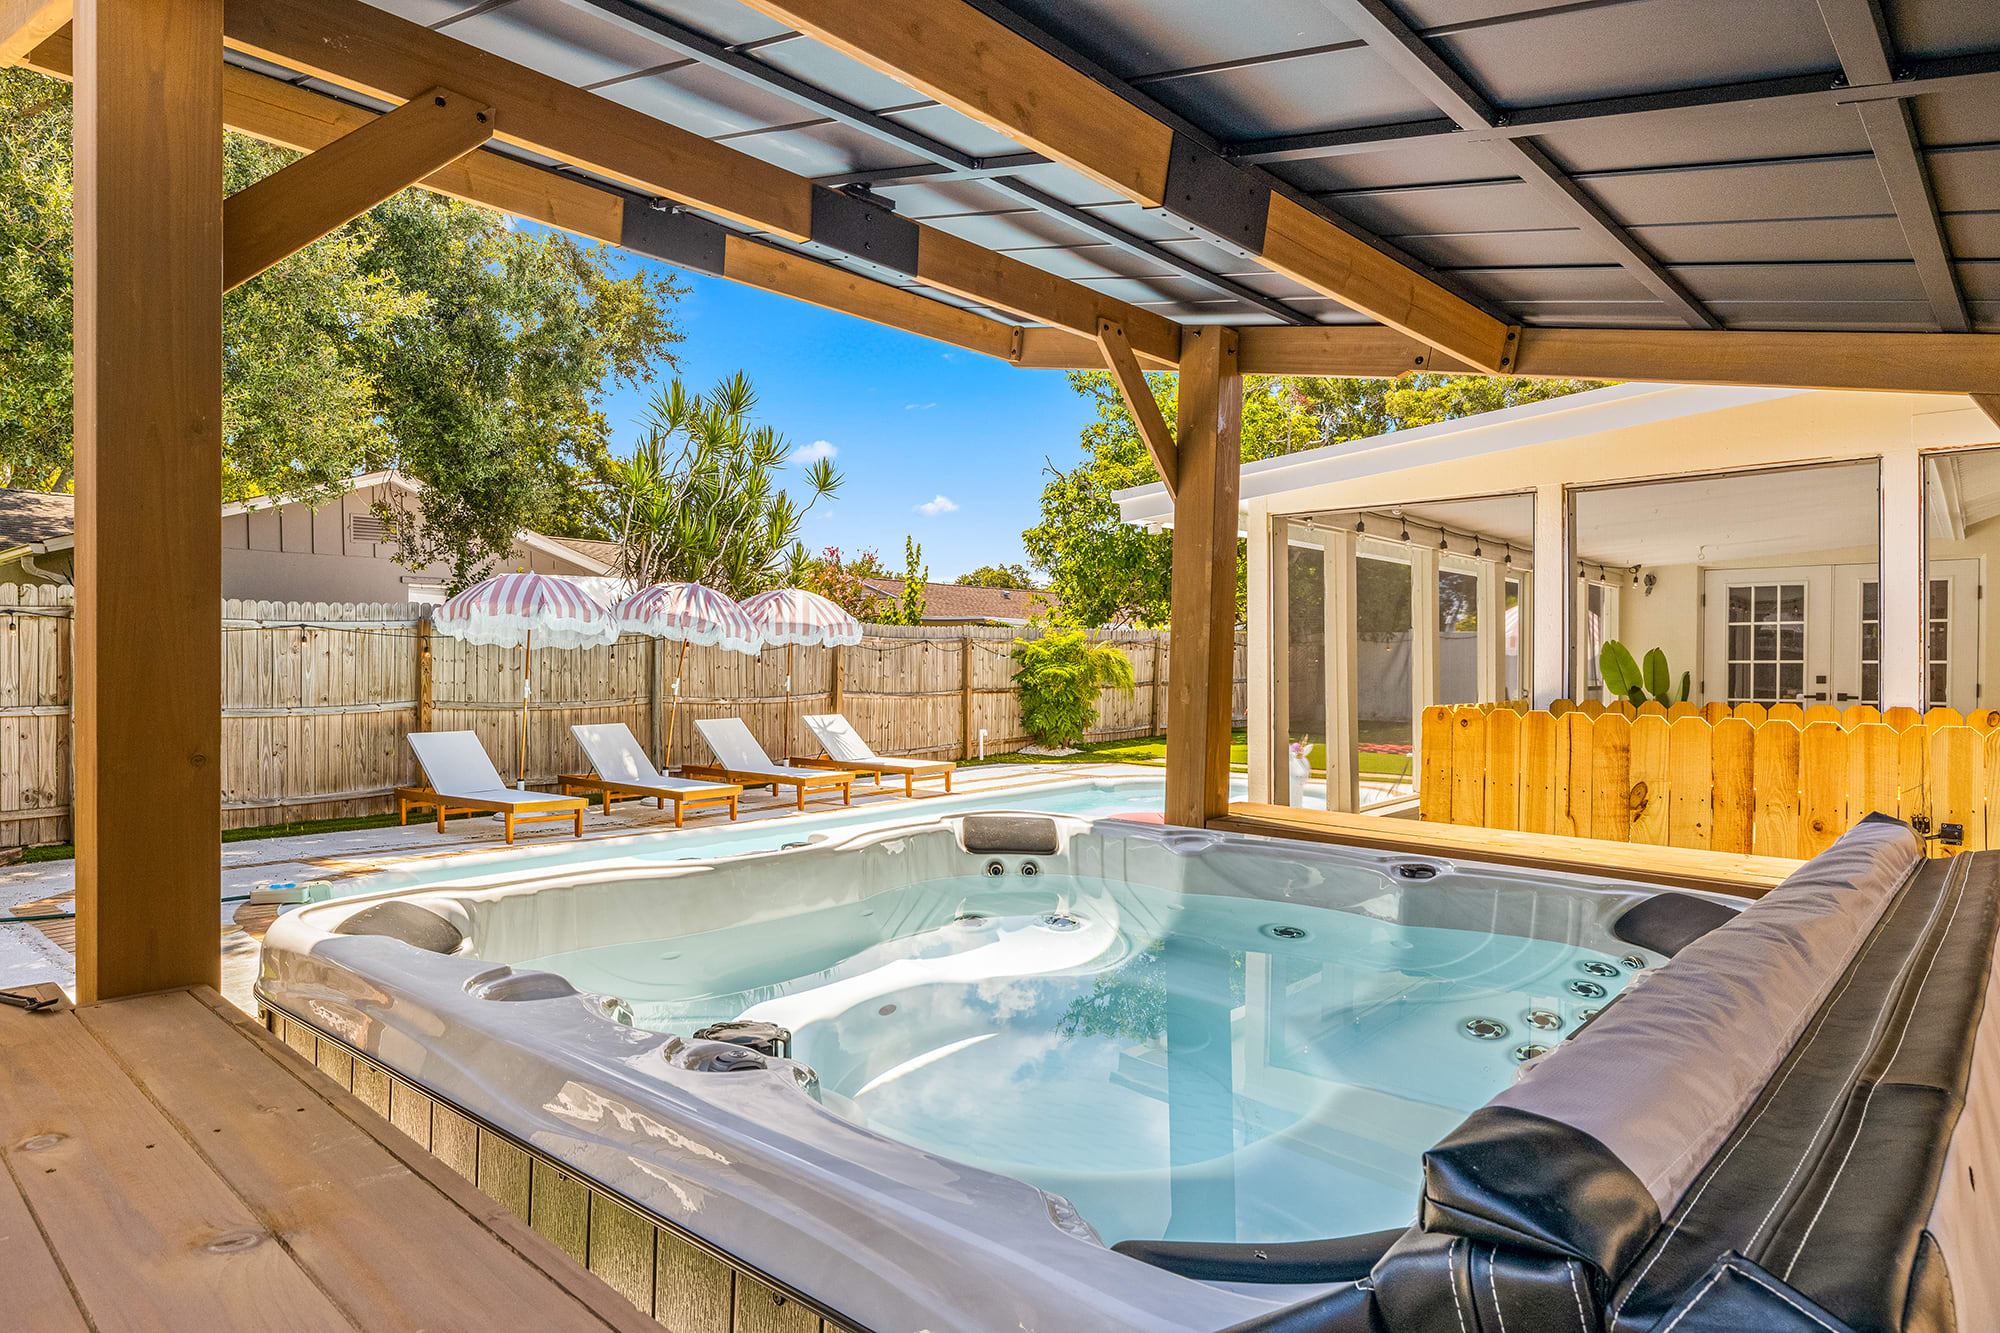 Did someone say hot tub? Soak in our 6 person hot tub